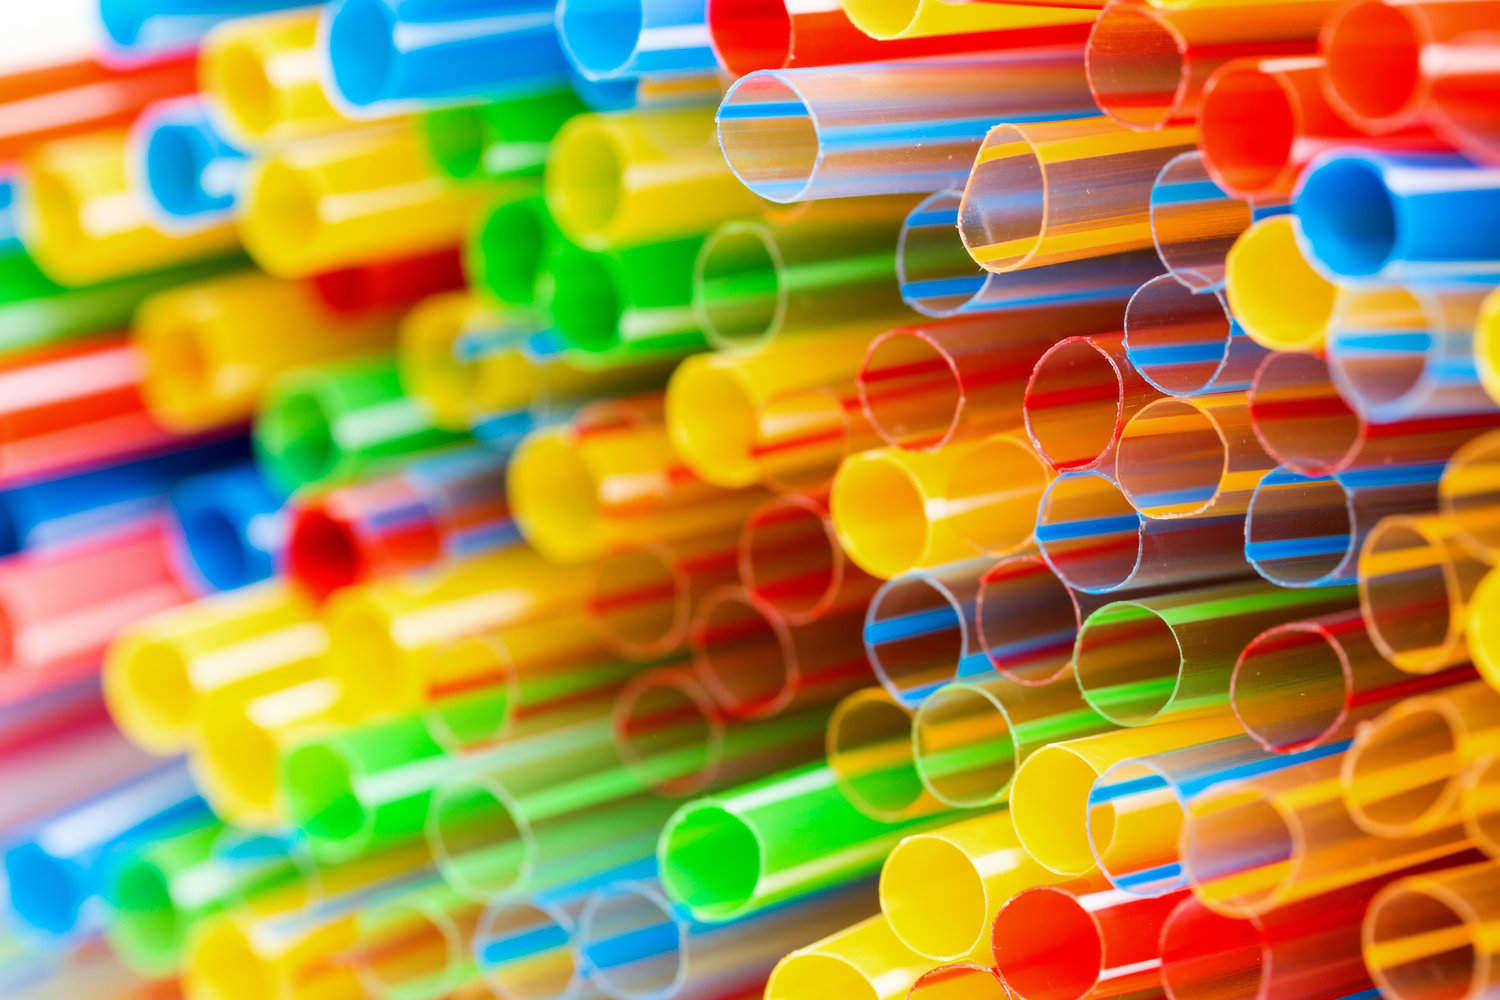 Research shows that in the US alone 500 million plastic straws are used every day.